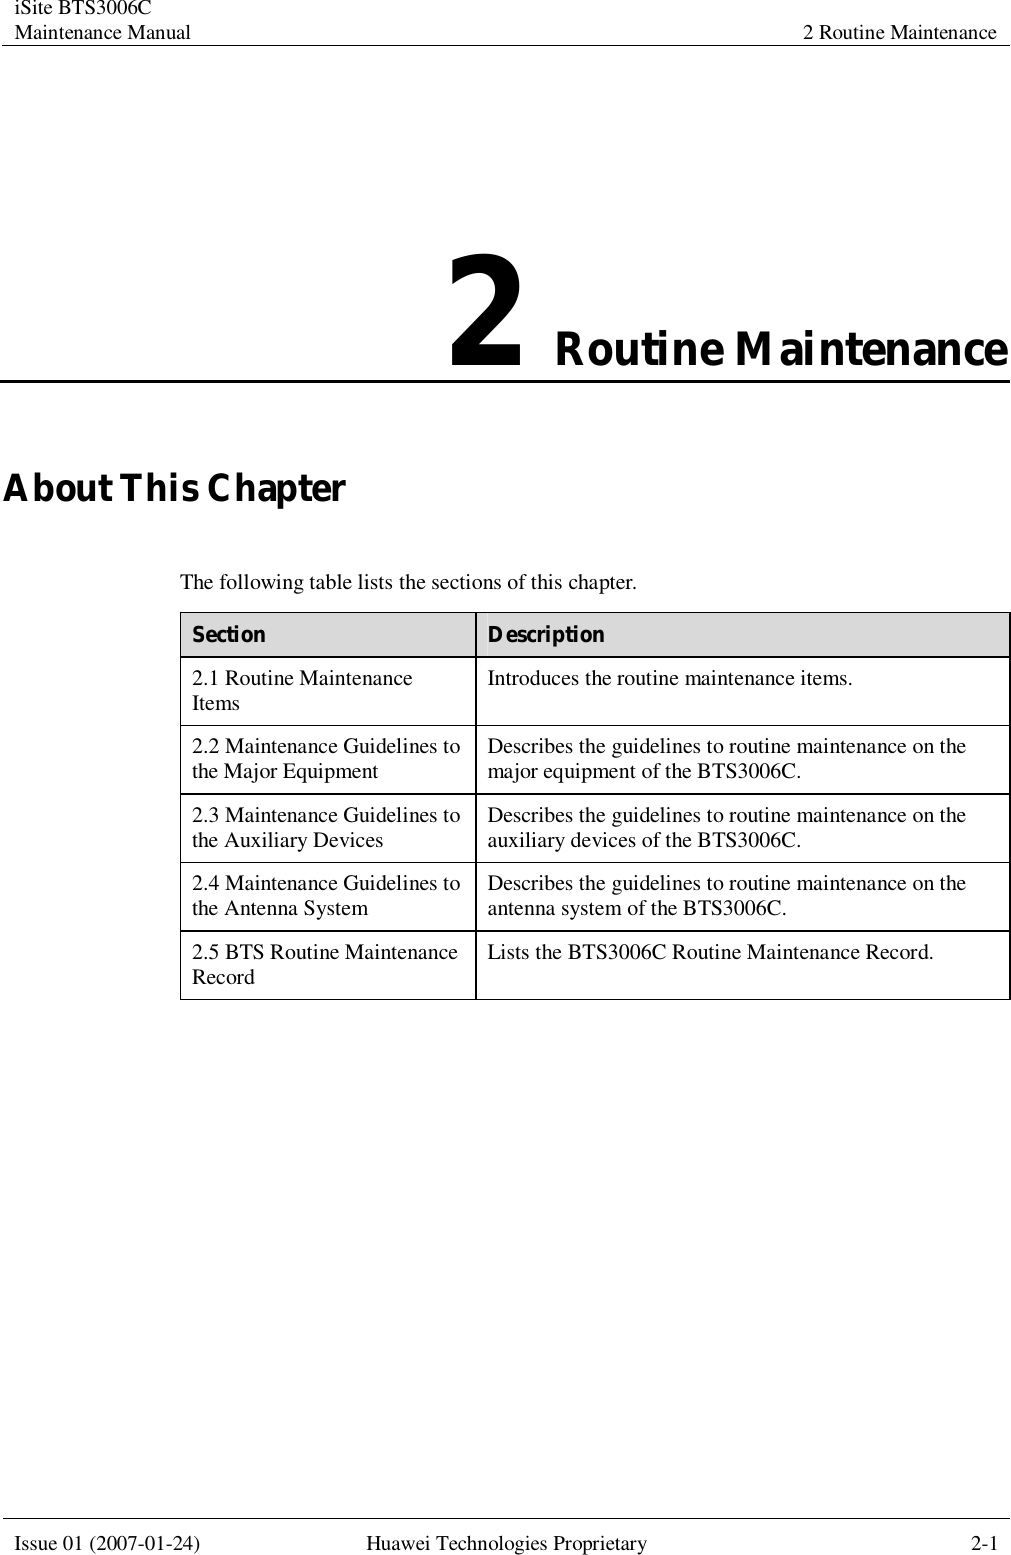 iSite BTS3006C Maintenance Manual 2 Routine Maintenance  Issue 01 (2007-01-24) Huawei Technologies Proprietary 2-1  2 Routine Maintenance About This Chapter The following table lists the sections of this chapter. Section  Description 2.1 Routine Maintenance Items  Introduces the routine maintenance items. 2.2 Maintenance Guidelines to the Major Equipment  Describes the guidelines to routine maintenance on the major equipment of the BTS3006C. 2.3 Maintenance Guidelines to the Auxiliary Devices  Describes the guidelines to routine maintenance on the auxiliary devices of the BTS3006C. 2.4 Maintenance Guidelines to the Antenna System  Describes the guidelines to routine maintenance on the antenna system of the BTS3006C. 2.5 BTS Routine Maintenance Record  Lists the BTS3006C Routine Maintenance Record.  